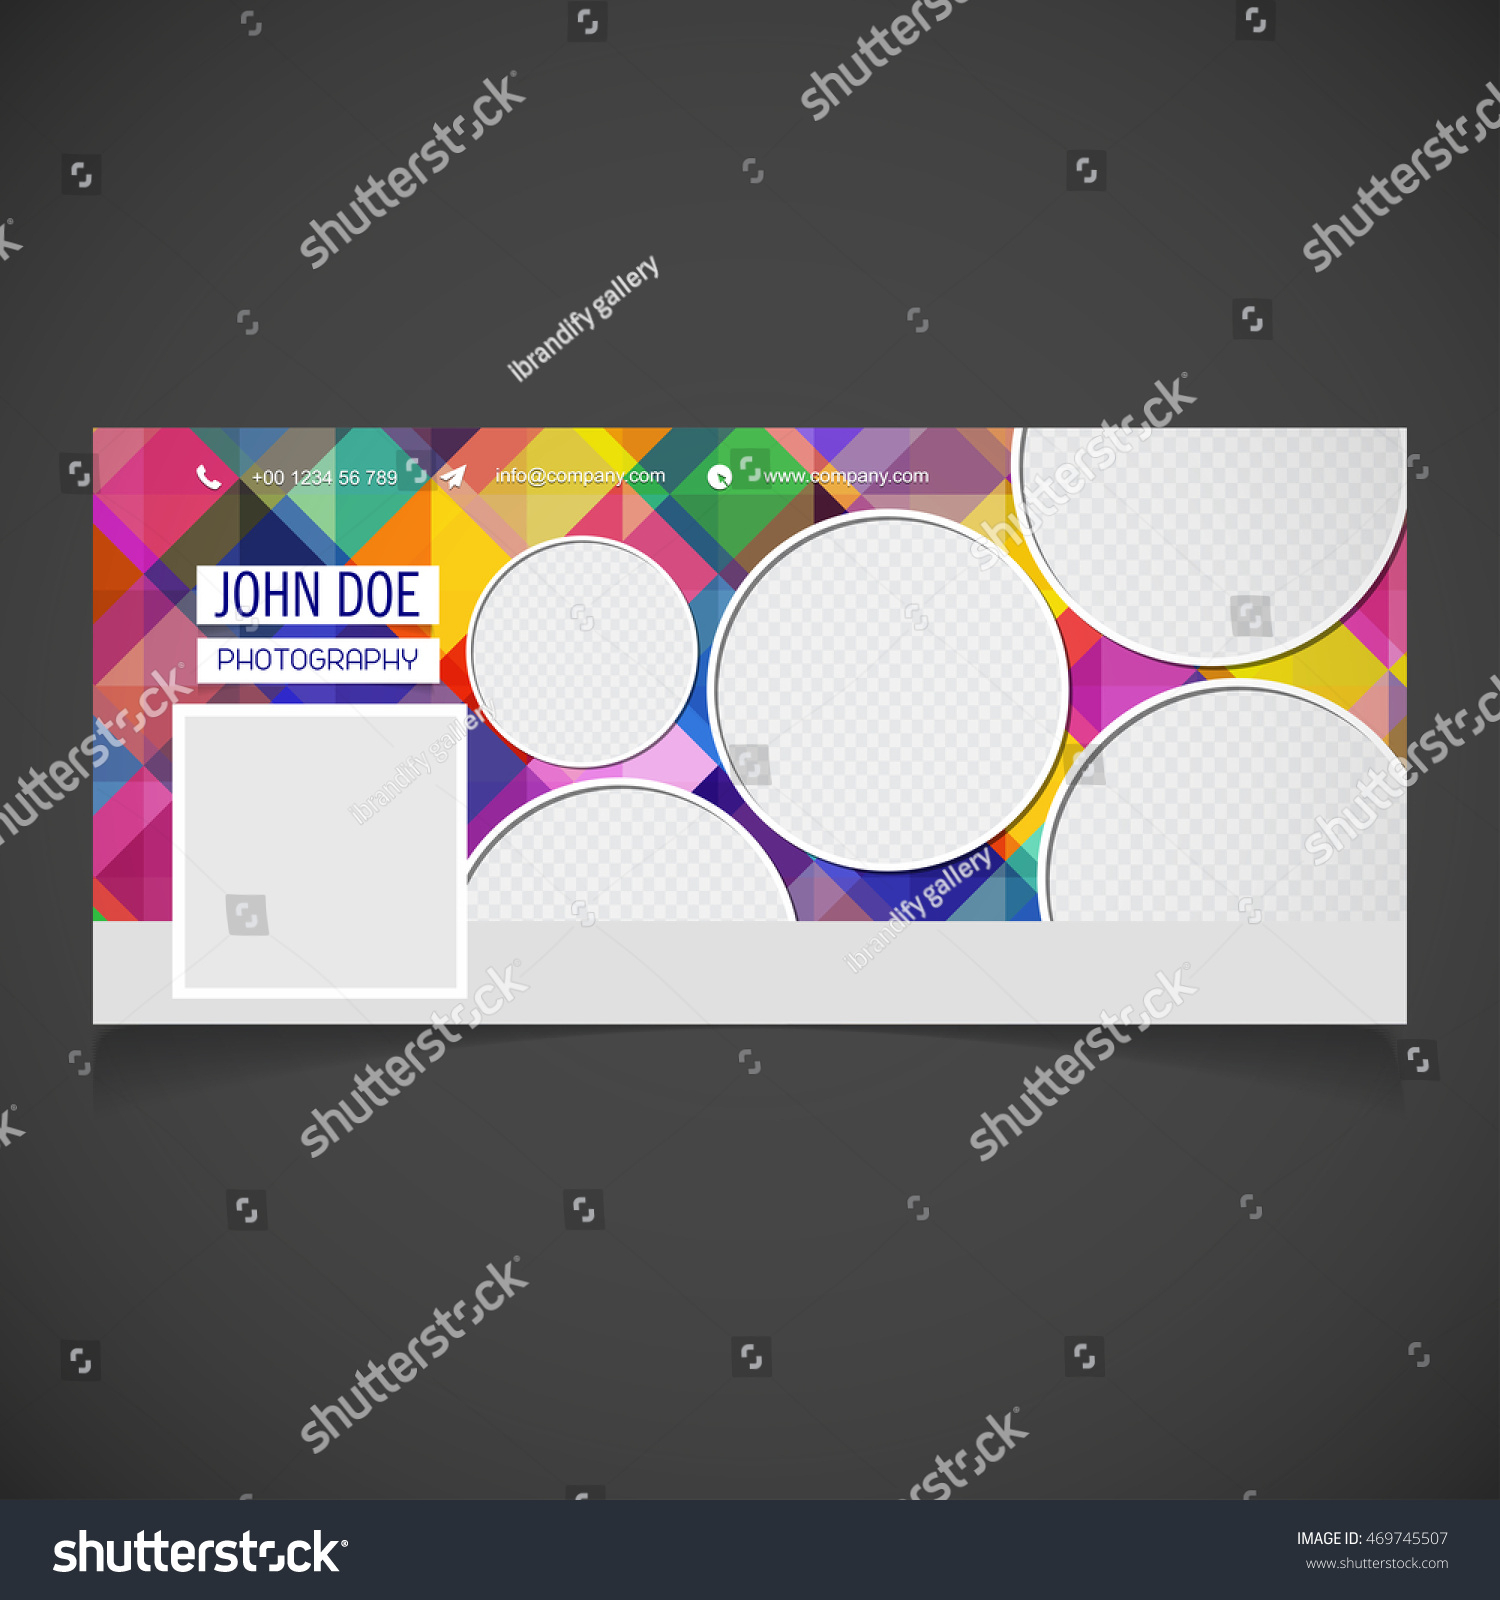 Creative Photography Banner Template Place Image Stock Throughout Photography Banner Template